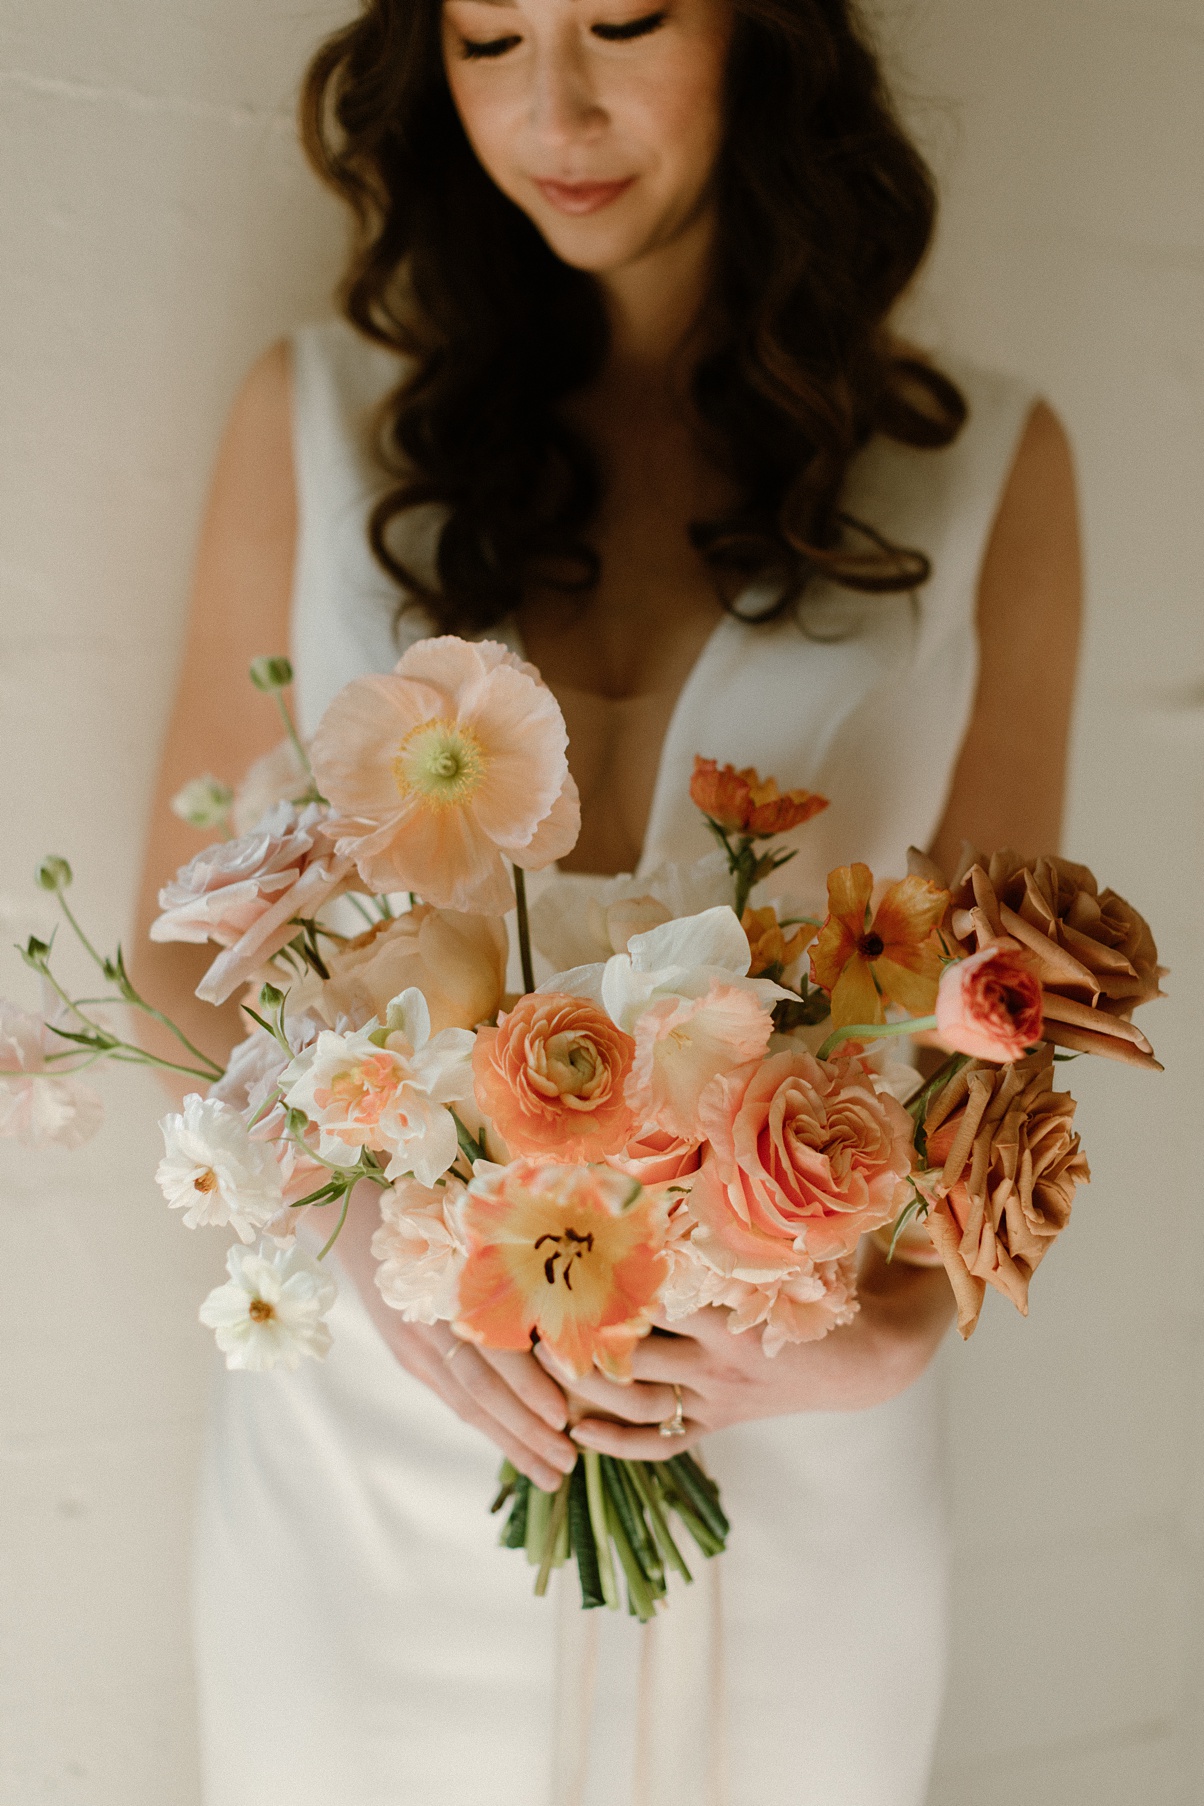 Block 41 wedding bridal bouquet in sophisticated color palette of taupes, blushes, and orange